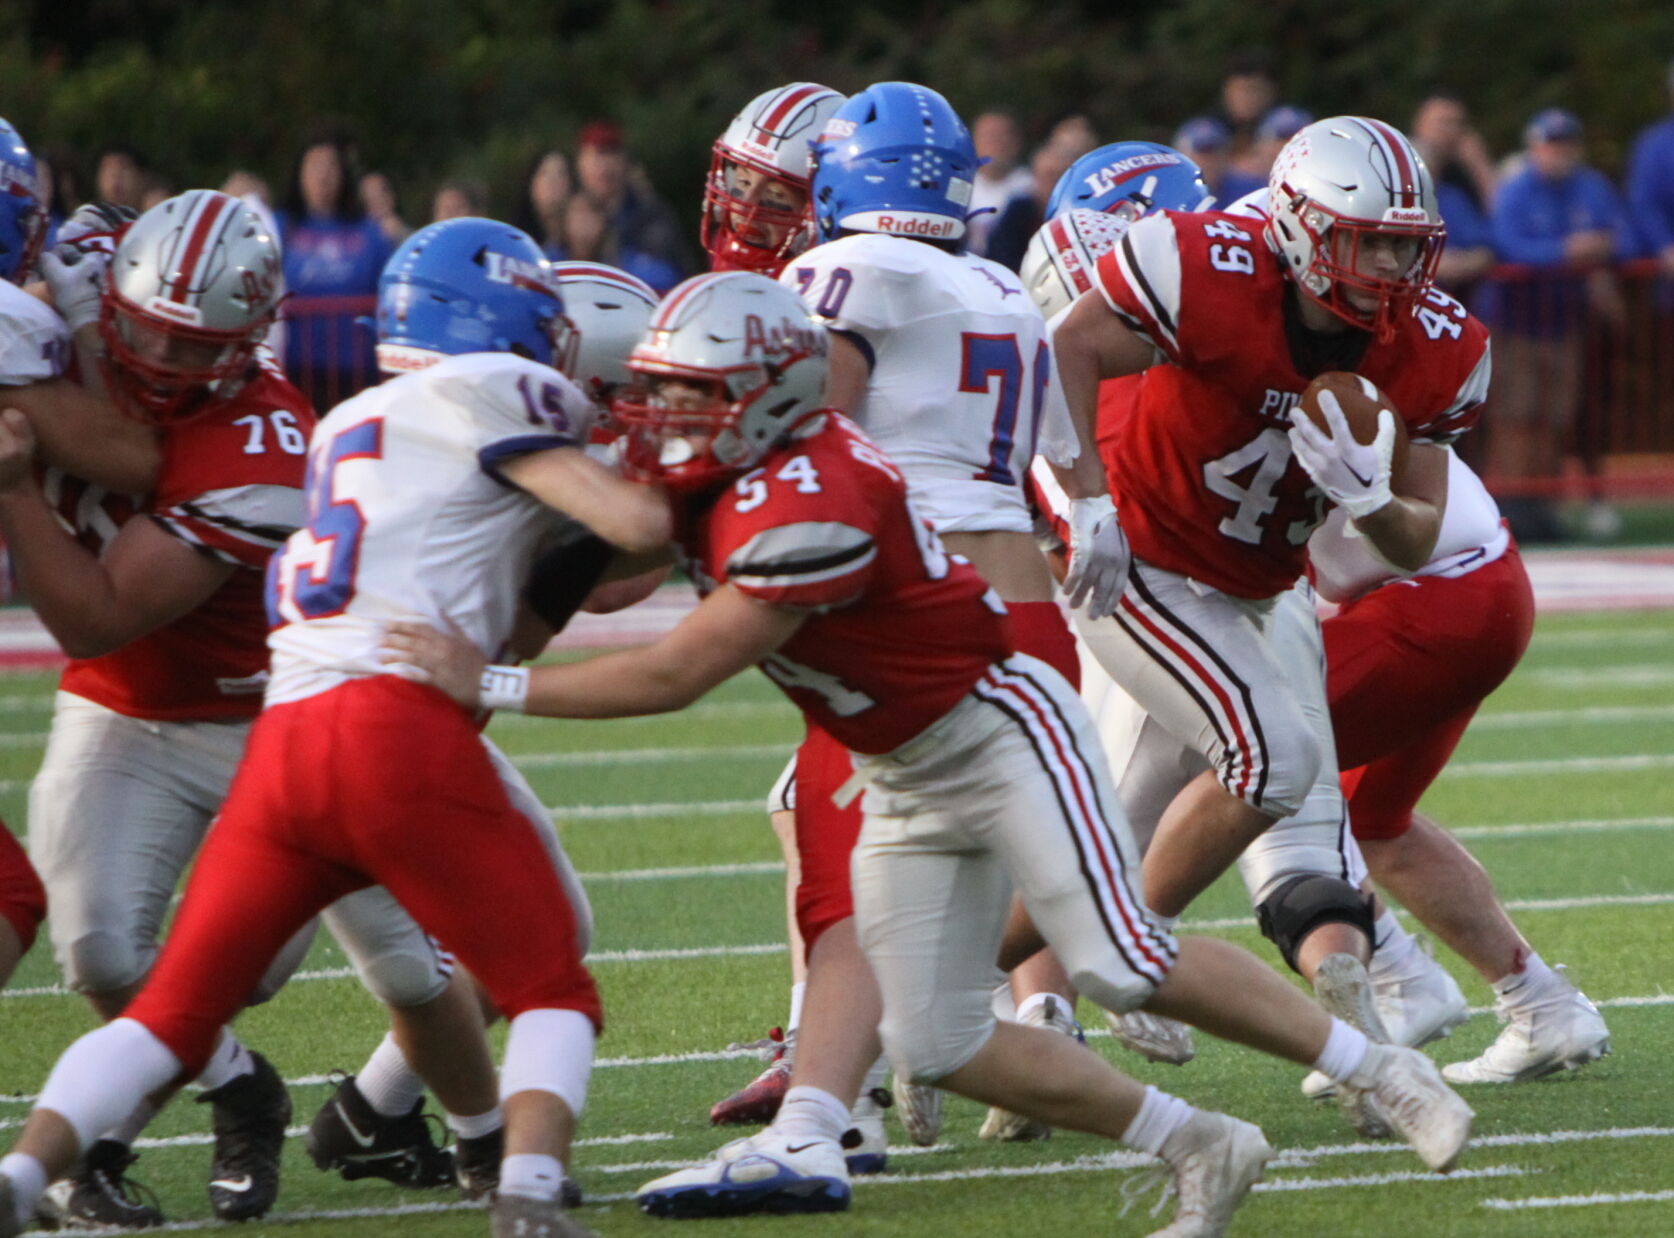 Pinkerton Academy stages incredible comeback to seal victory over Londonderry